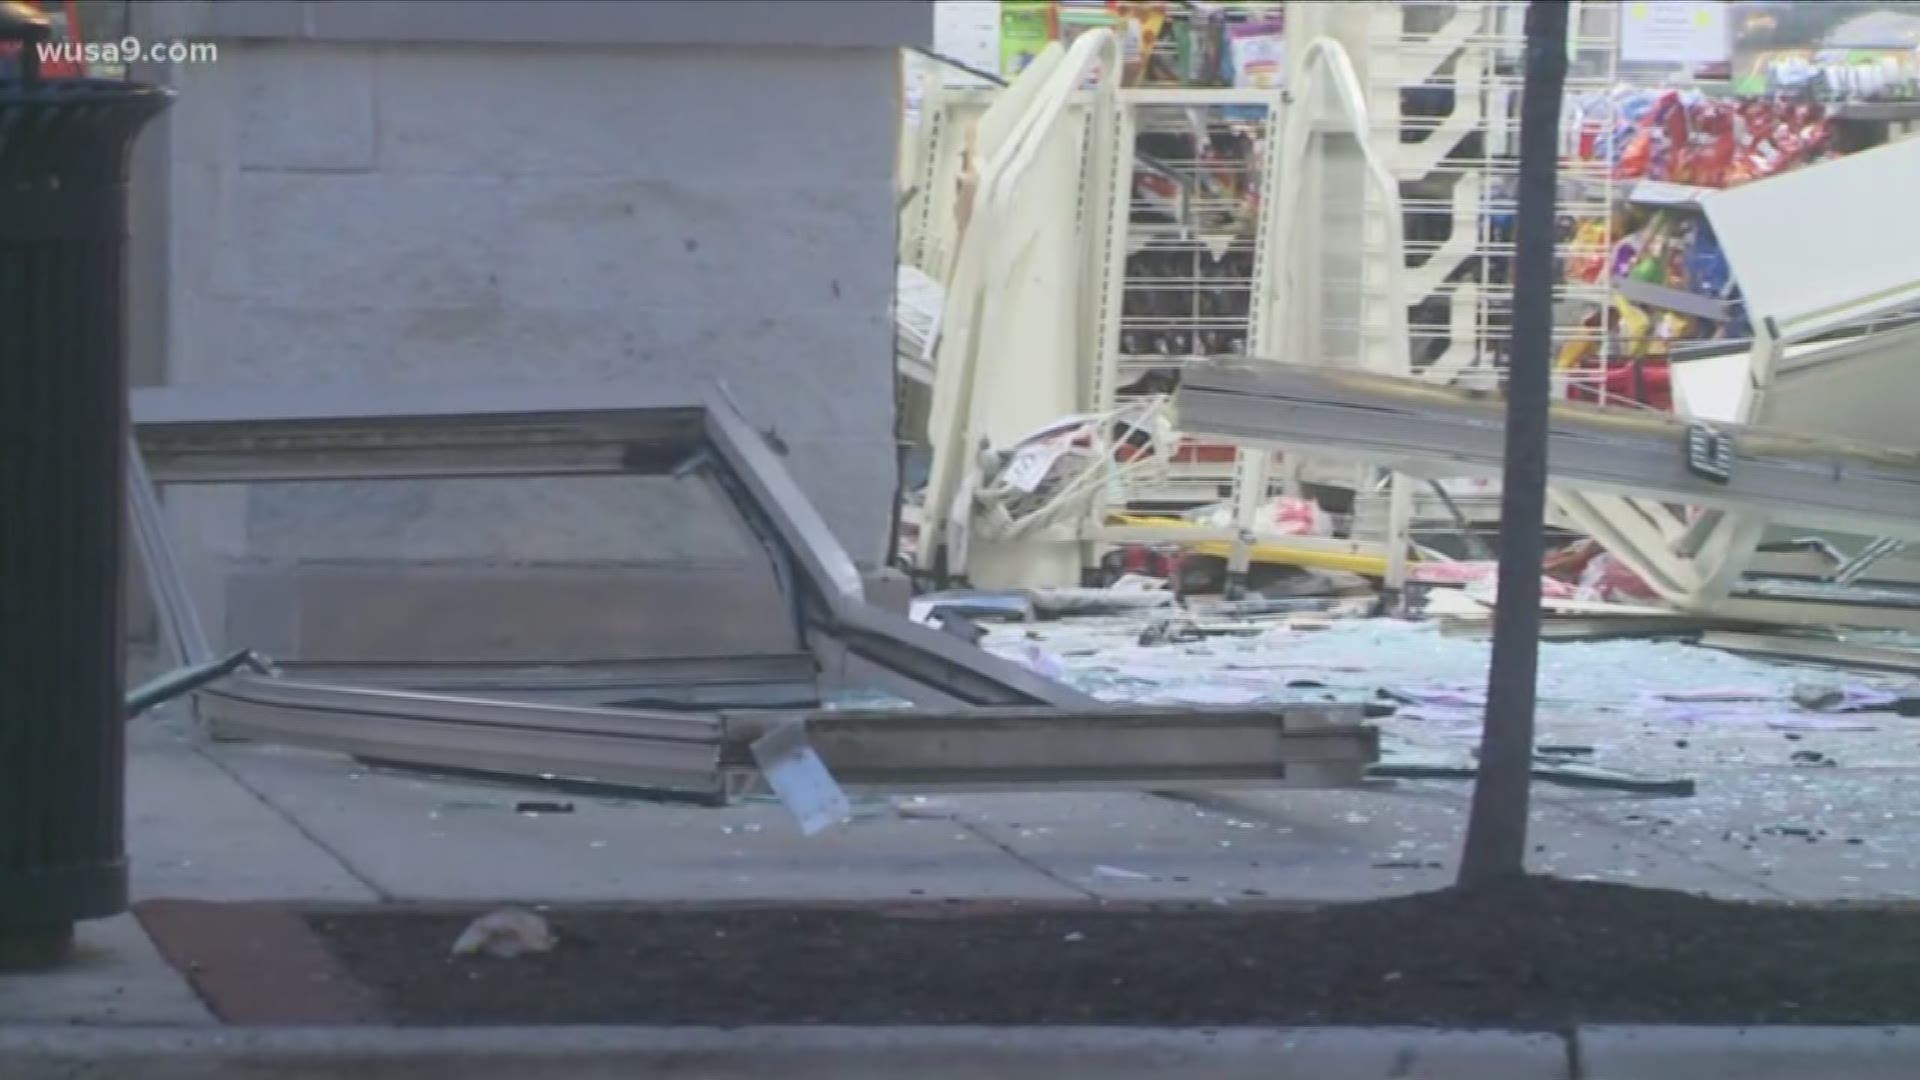 Smash-and-grab bandits have stuck again at 7-Eleven ATM in Silver Spring.

Three men used a truck to ram a 7-Eleven storefront in the 12200 block of Tech Road around 3:18 a.m. Thursday, Montgomery County police officials. 

The store sustained heavy damage. The suspects were able to load the ATM onto a truck and take off, police said.